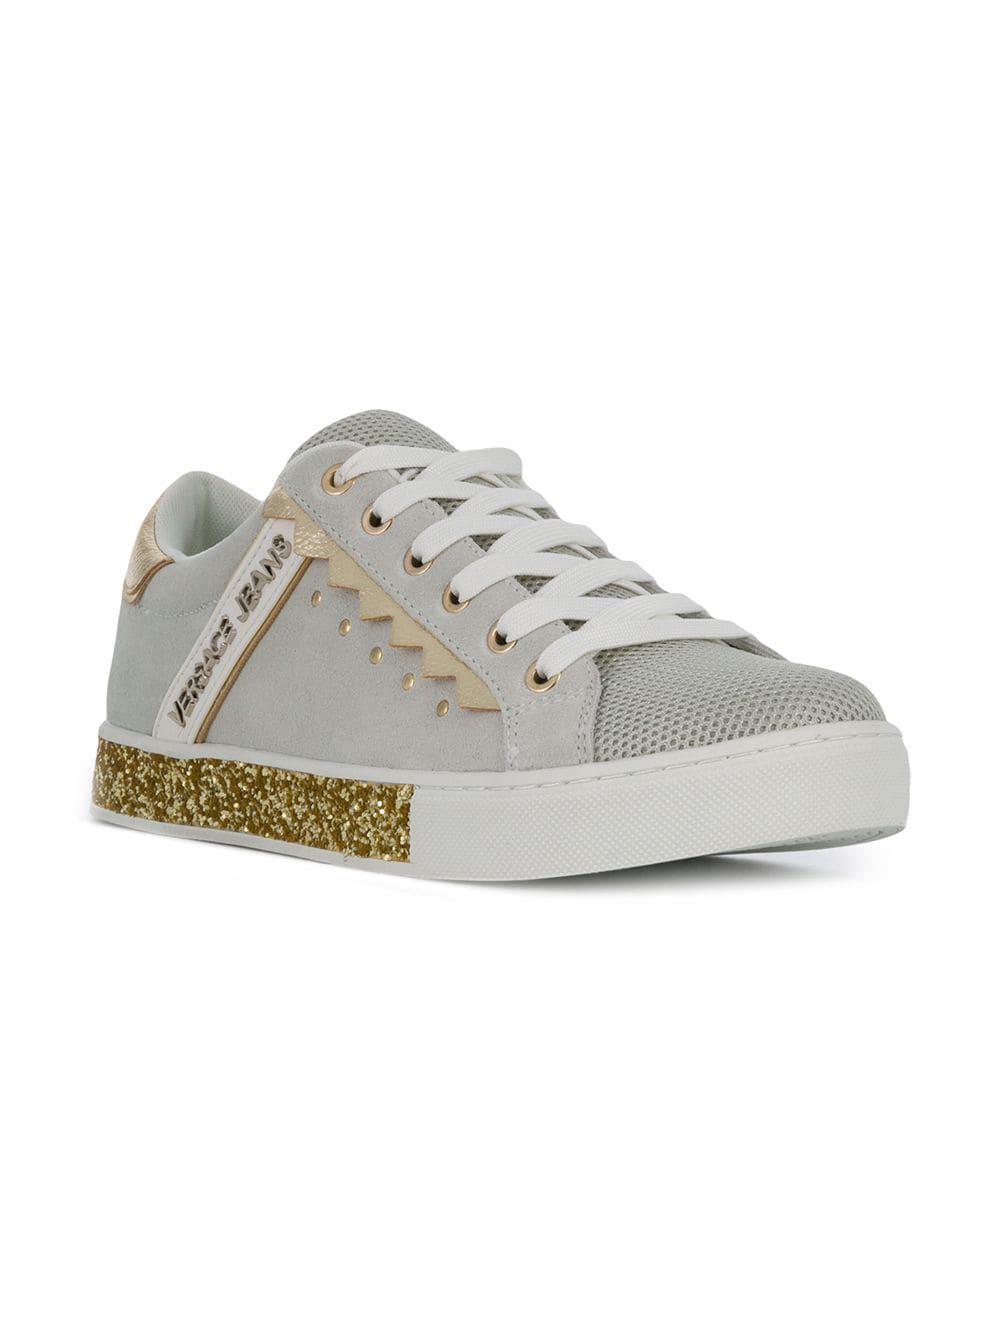 Versace Jeans Suede Glitter Sole Low-top Sneakers in White - Lyst